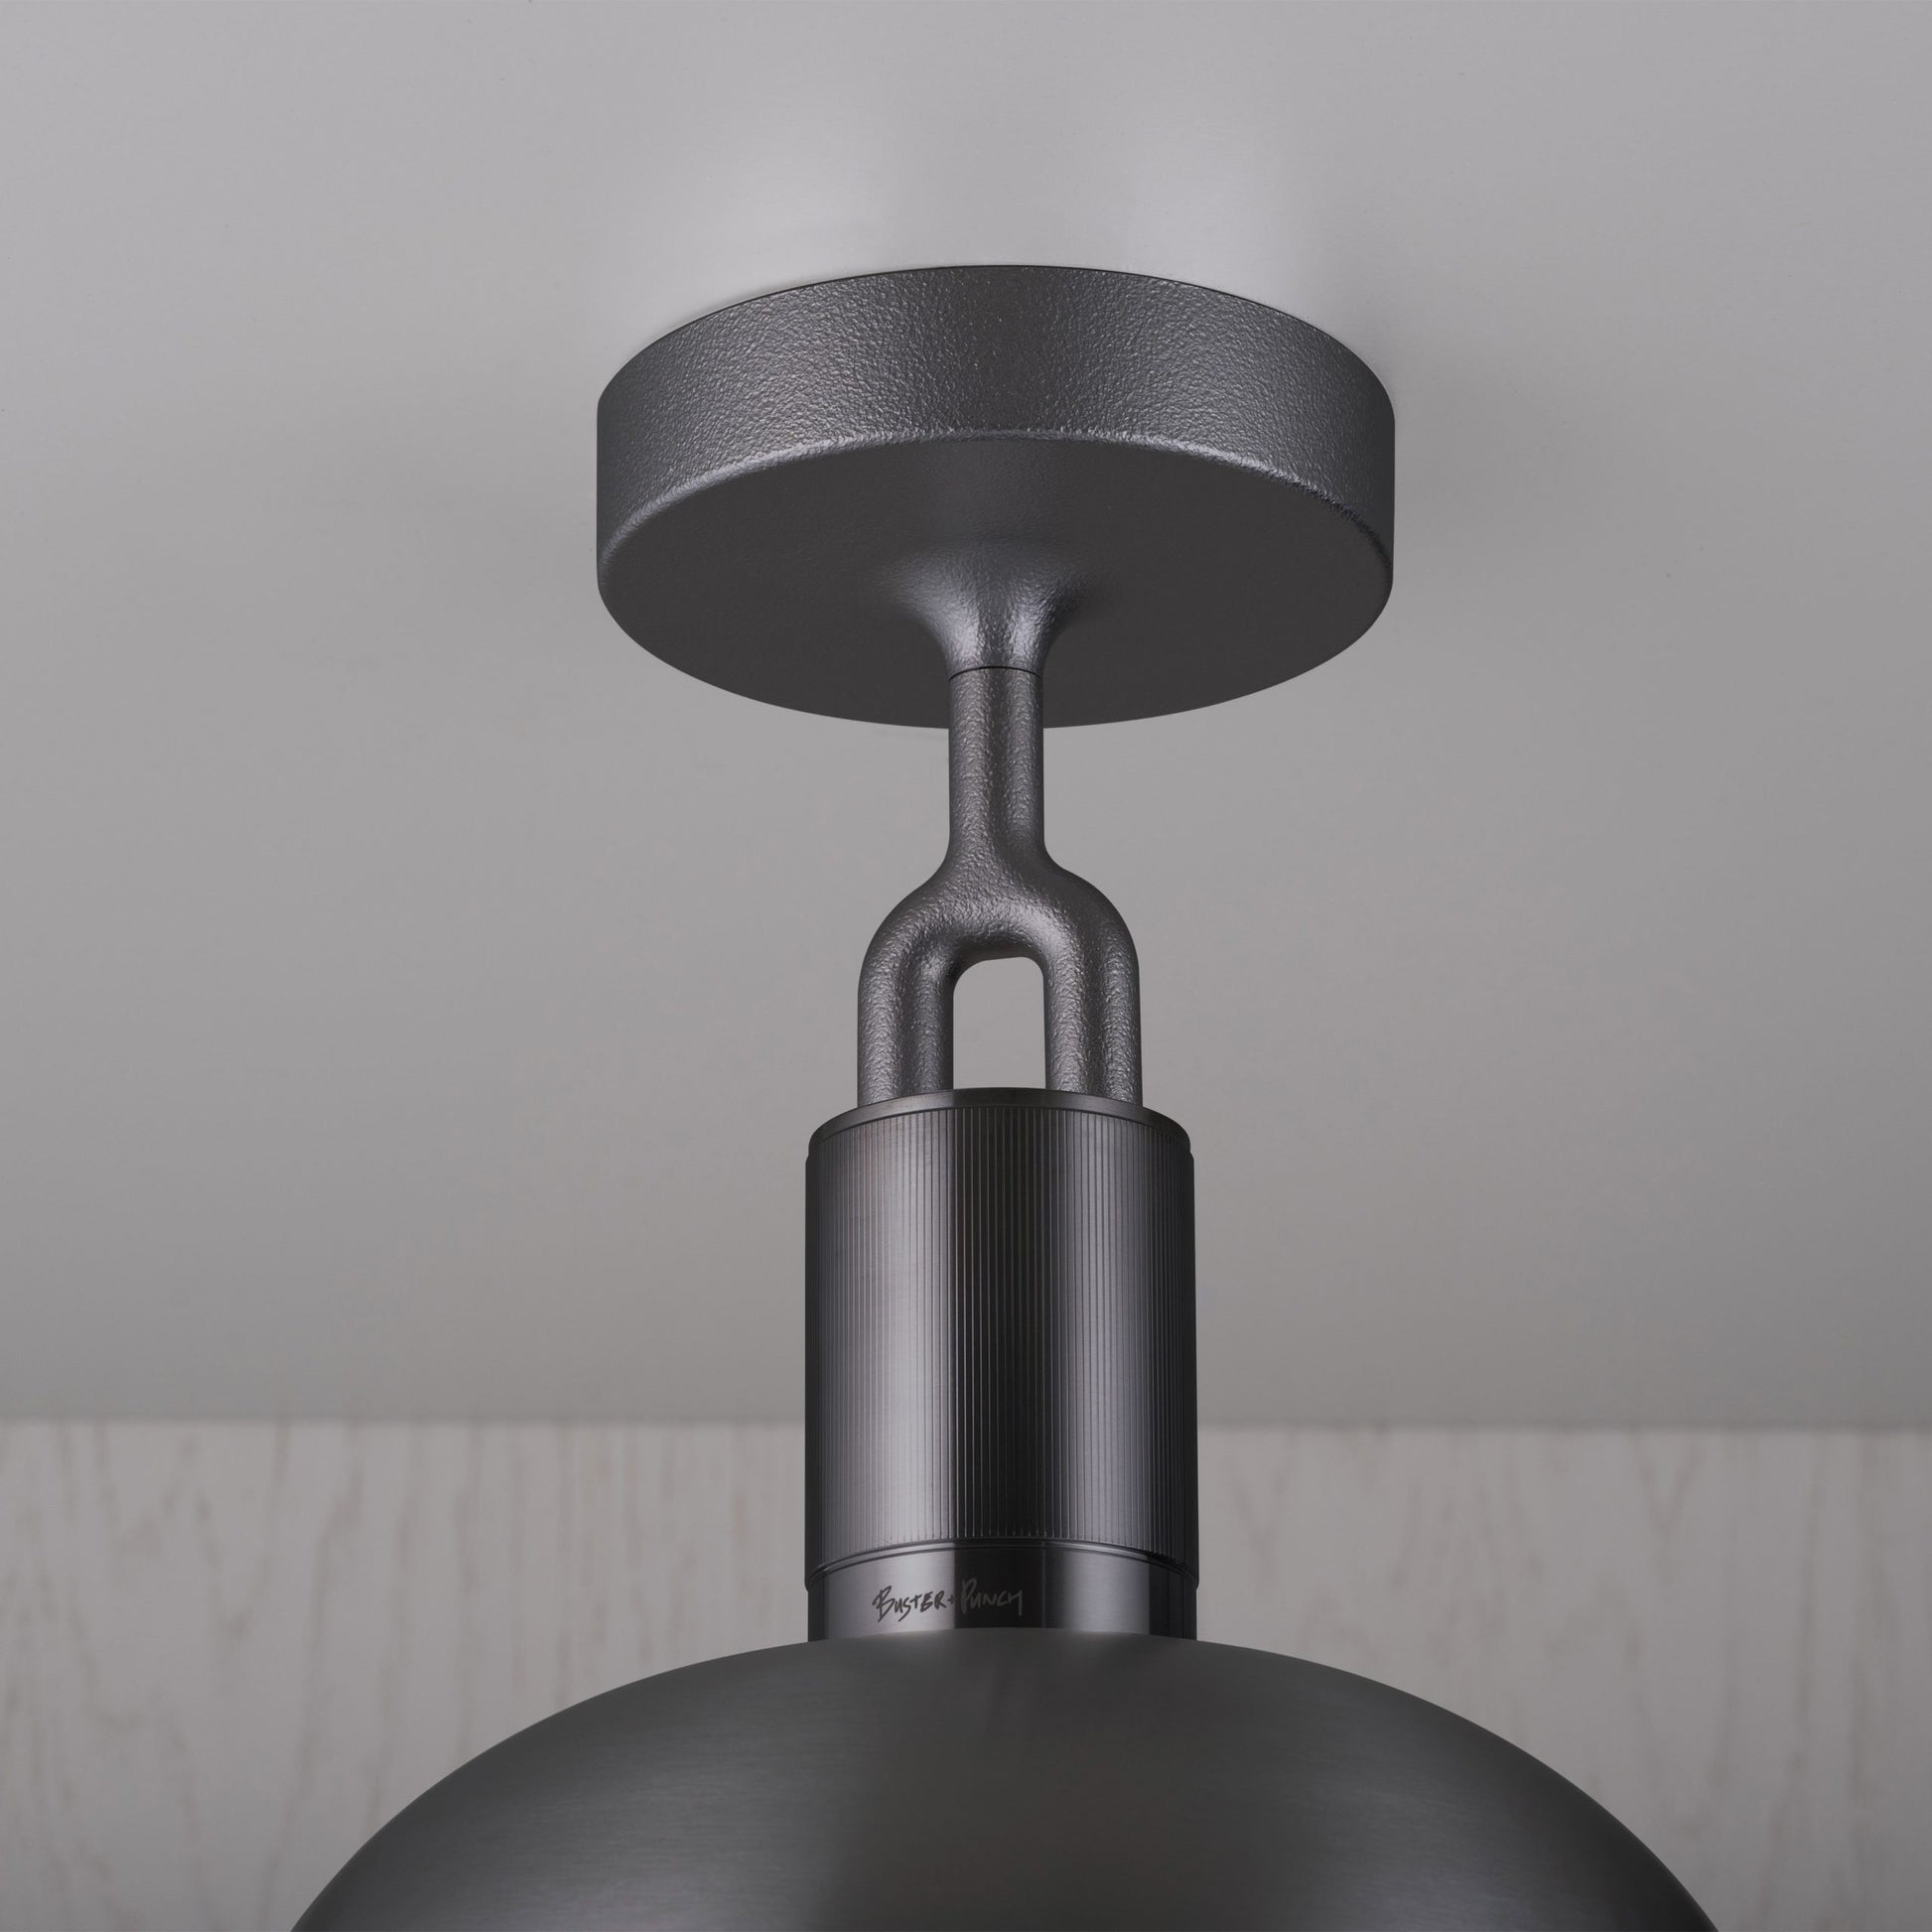 Forked Ceiling Light / Shade / Globe / Opal / Large Gun metal, detailed close up view of fork and fitting.